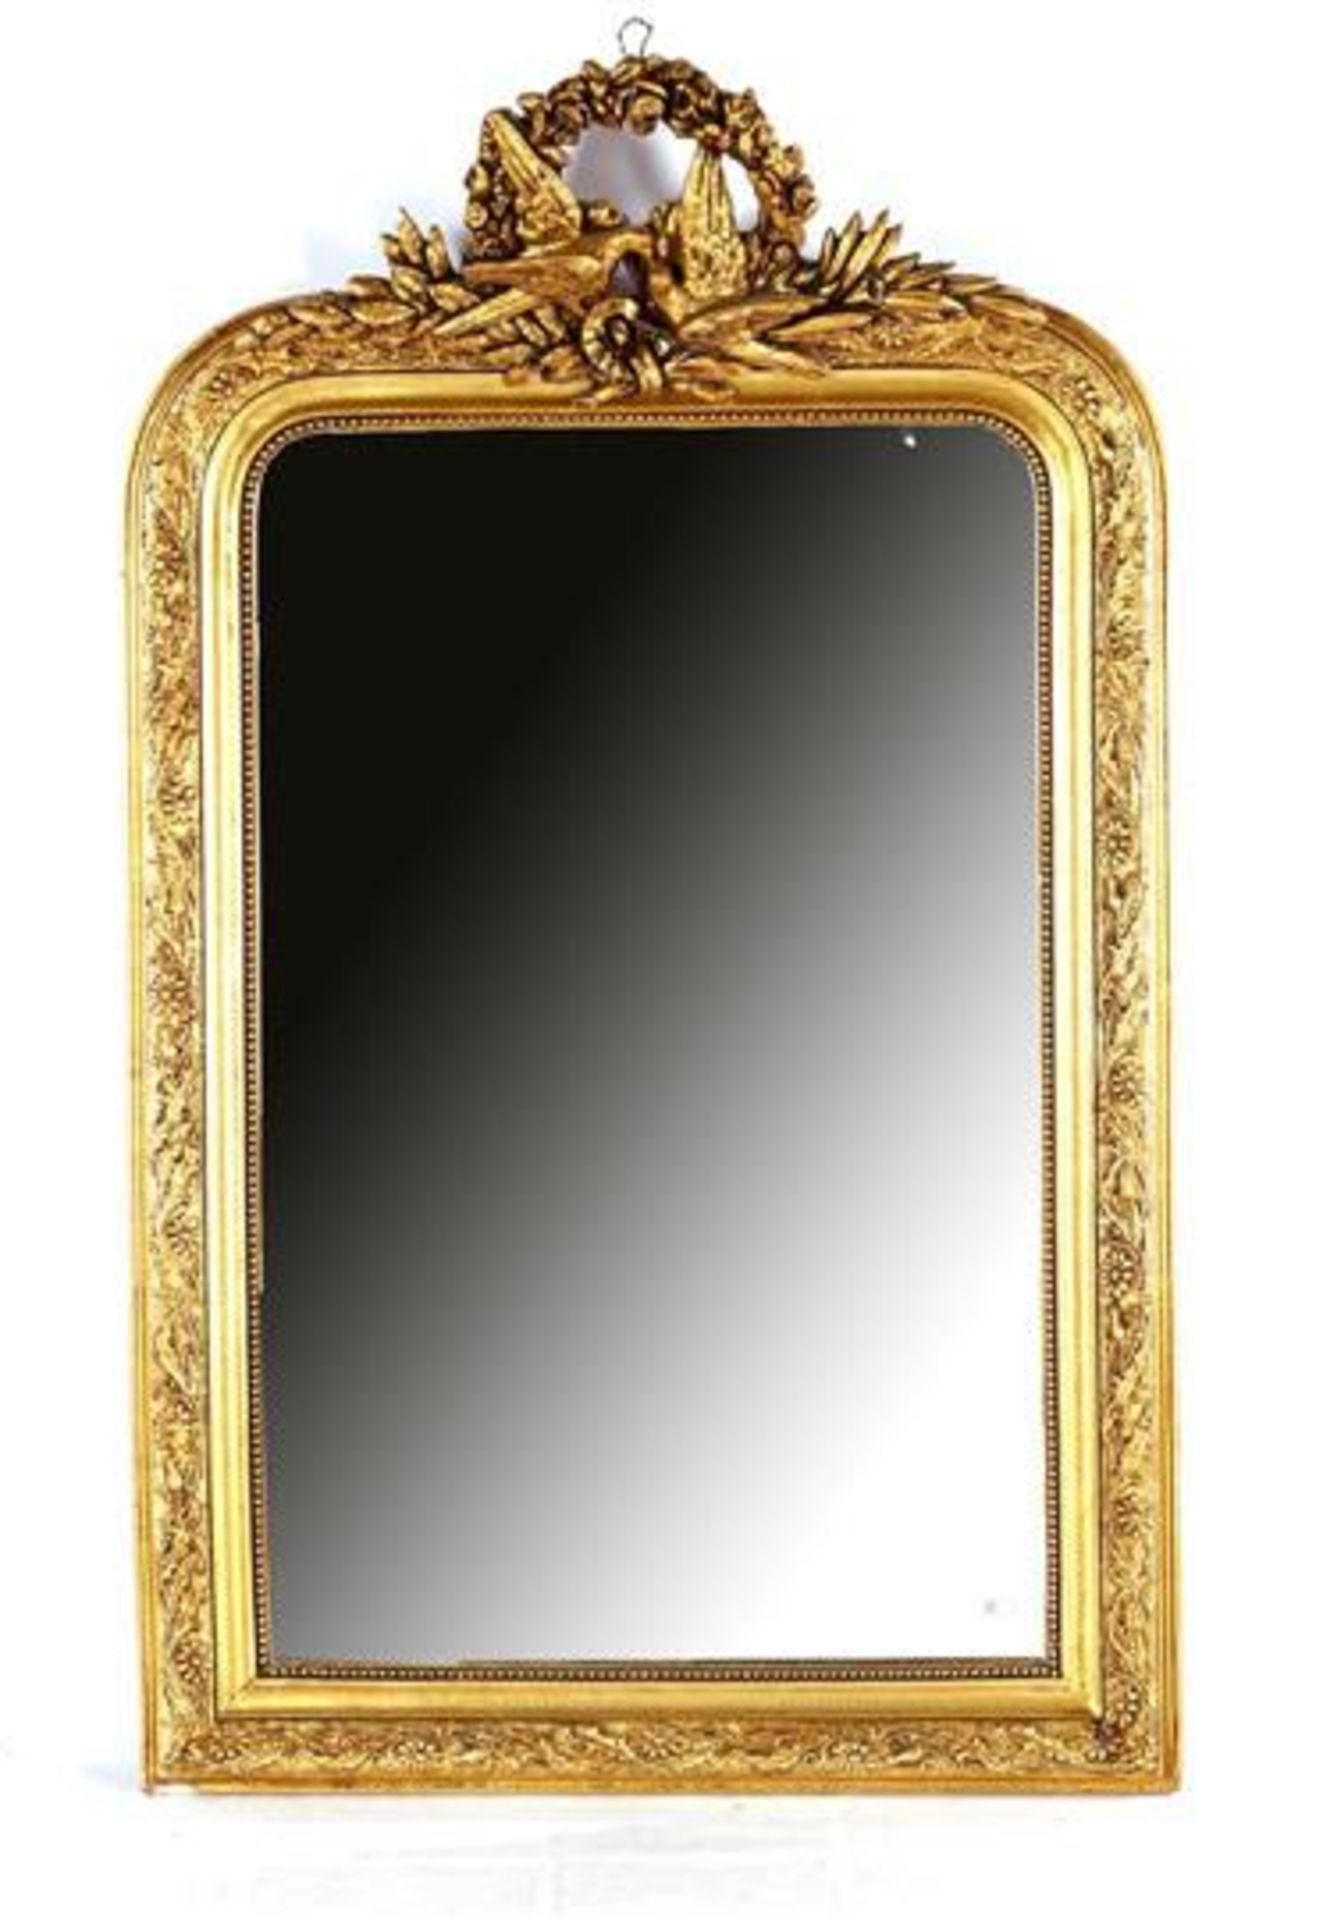 Mirror in a gold-colored frame with decorated crest, 124x75 cm